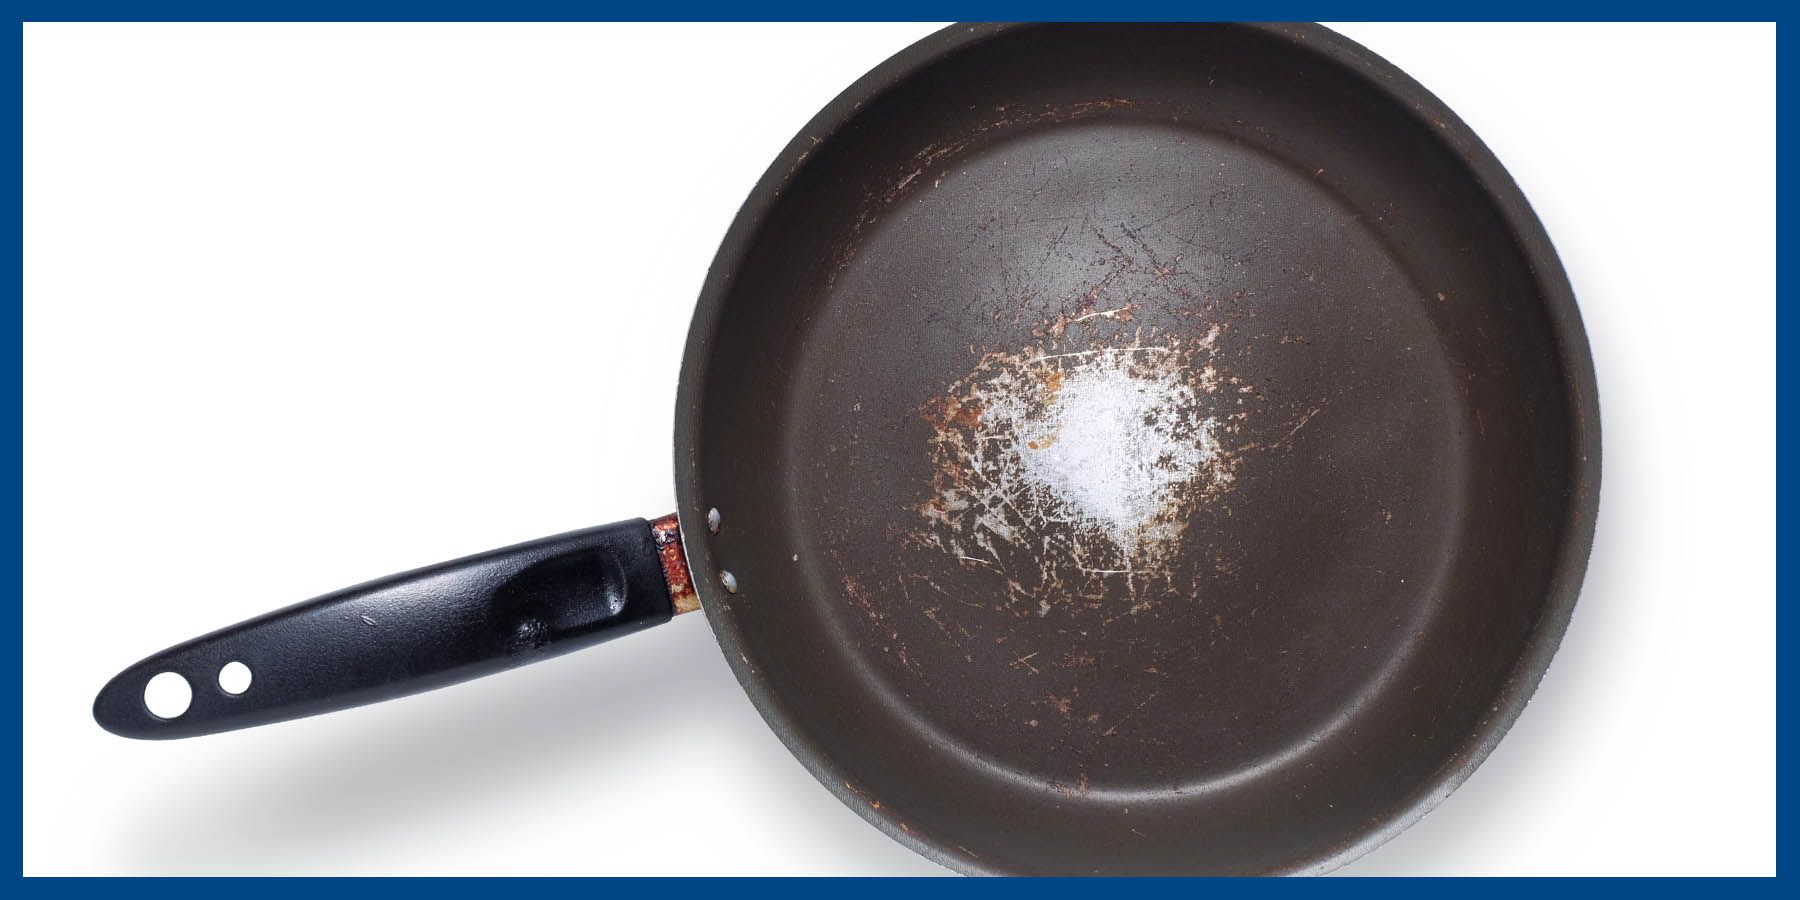 The Scary Way Your Nonstick Pans Can Turn Toxic